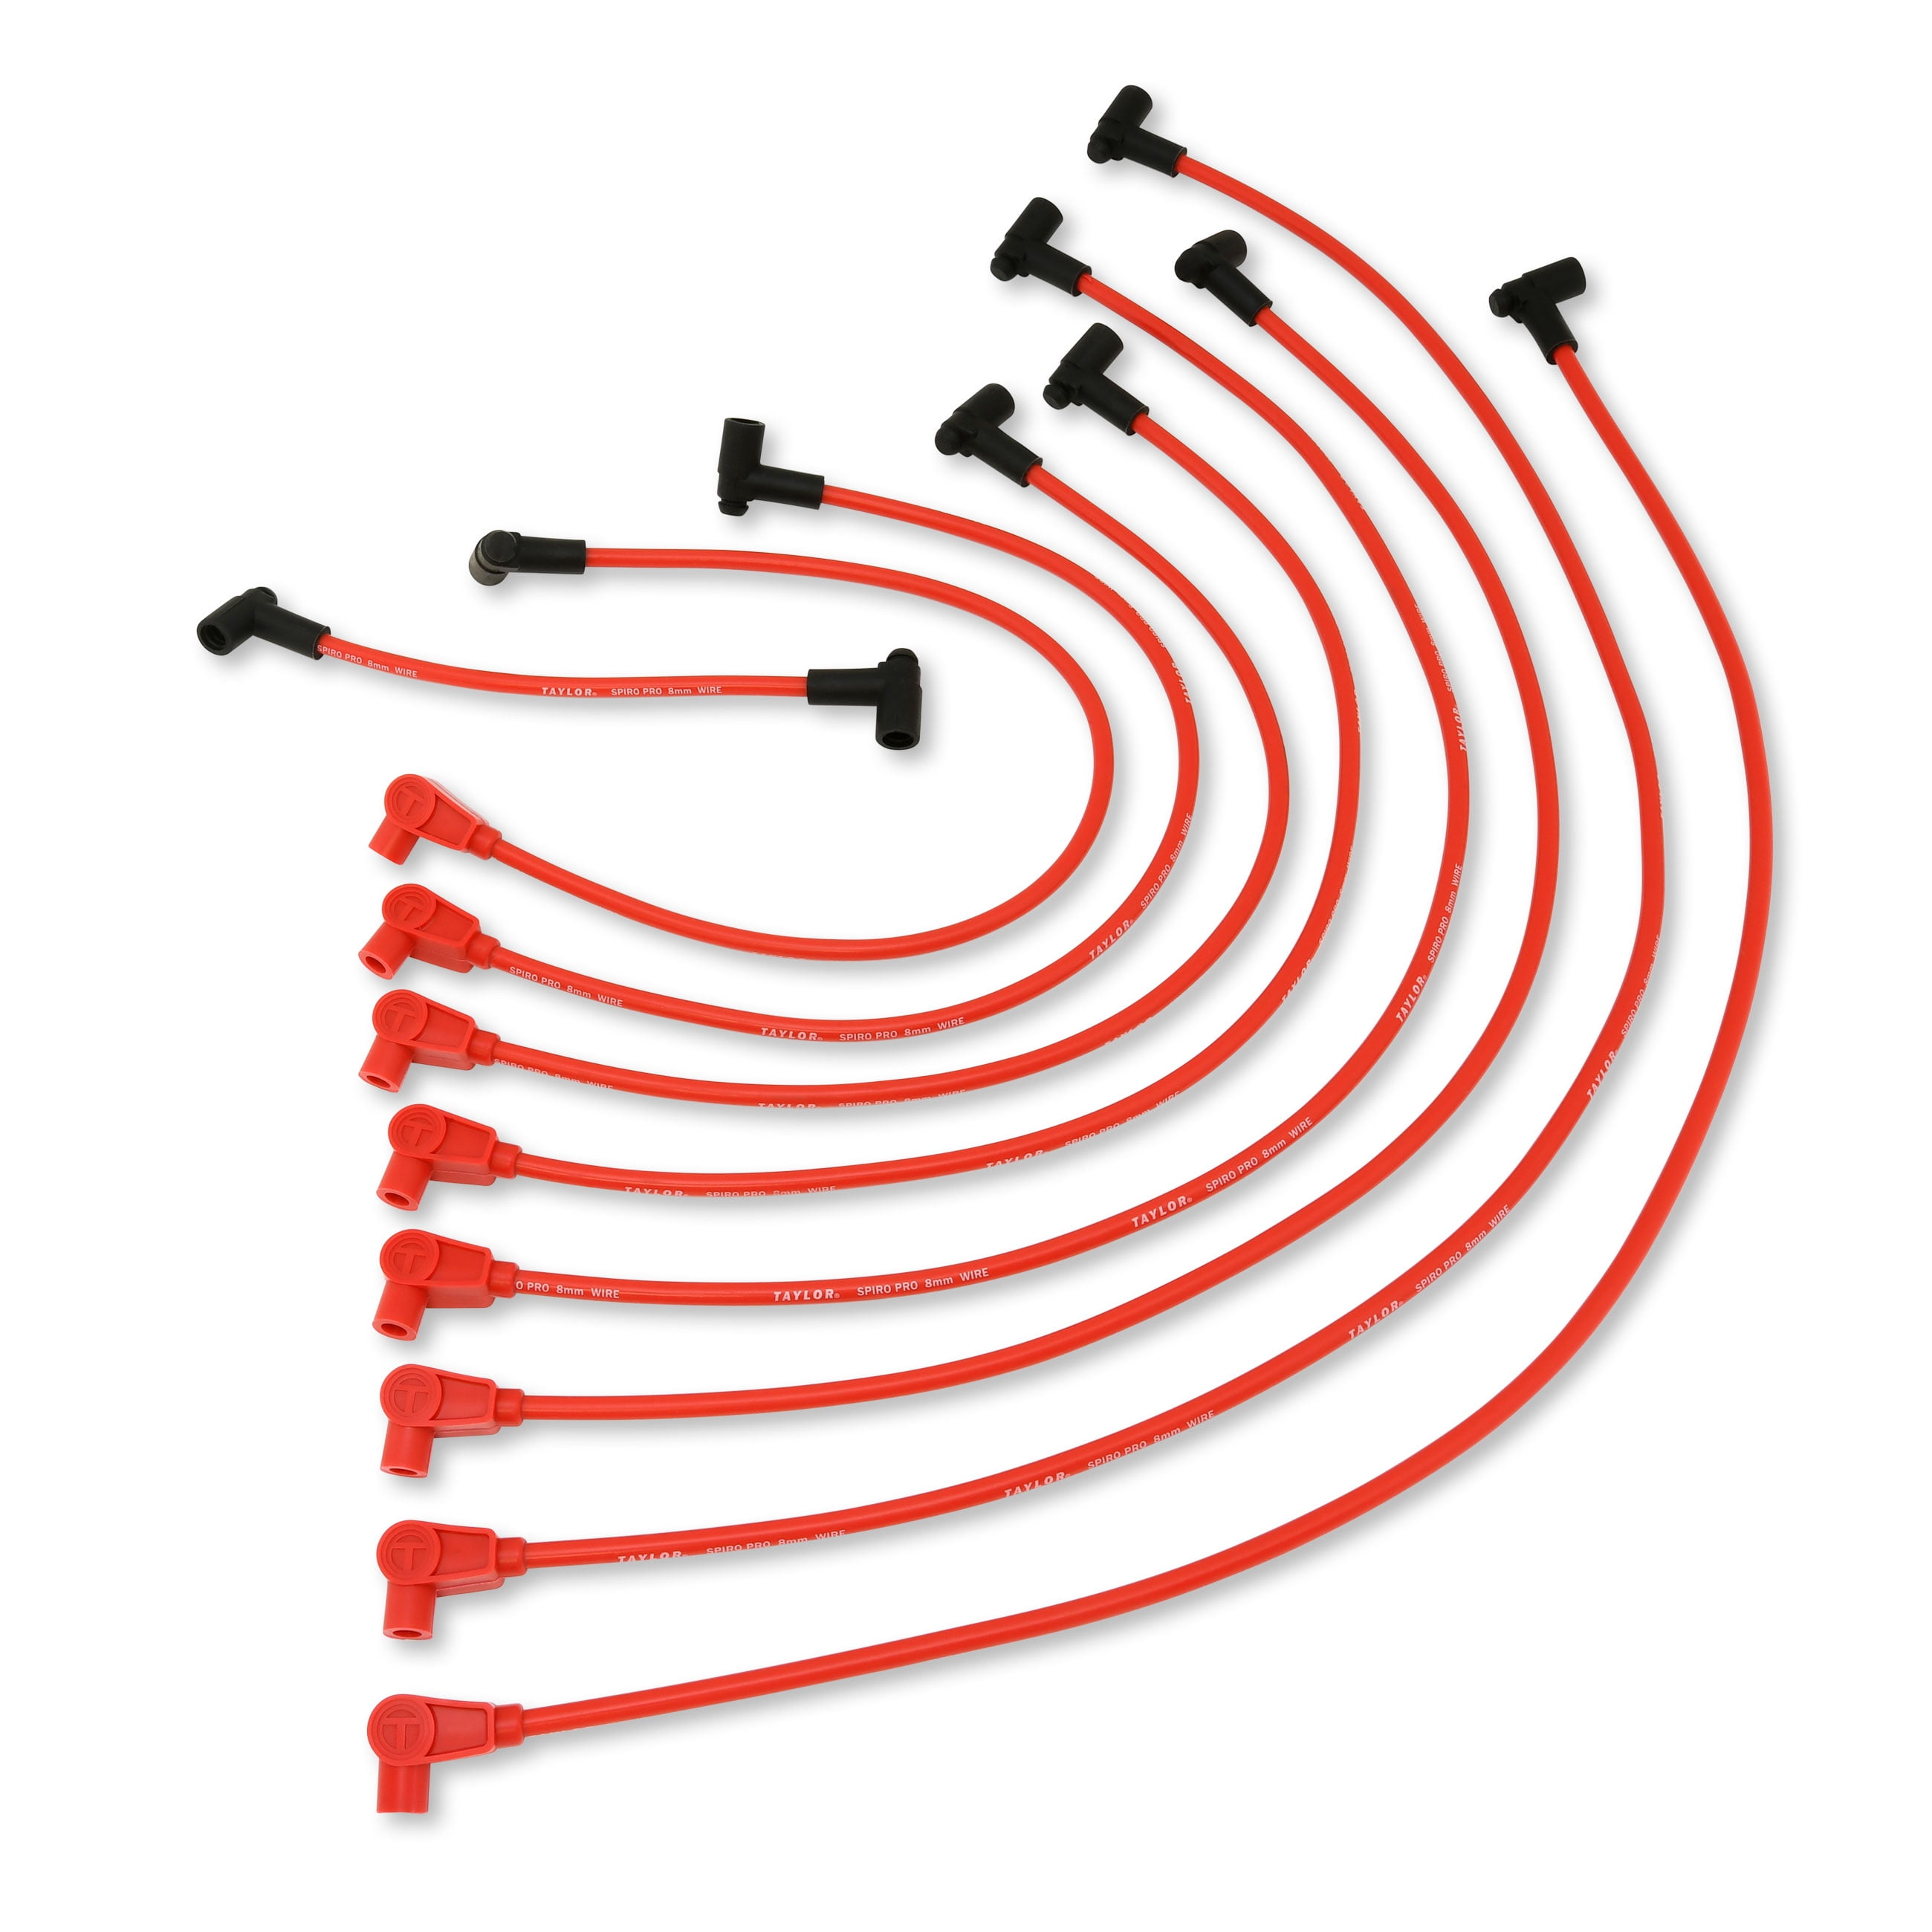 Red Universal 8mm 90 Degree Pro Plug Wires, Yamaha Motorcycle Parts